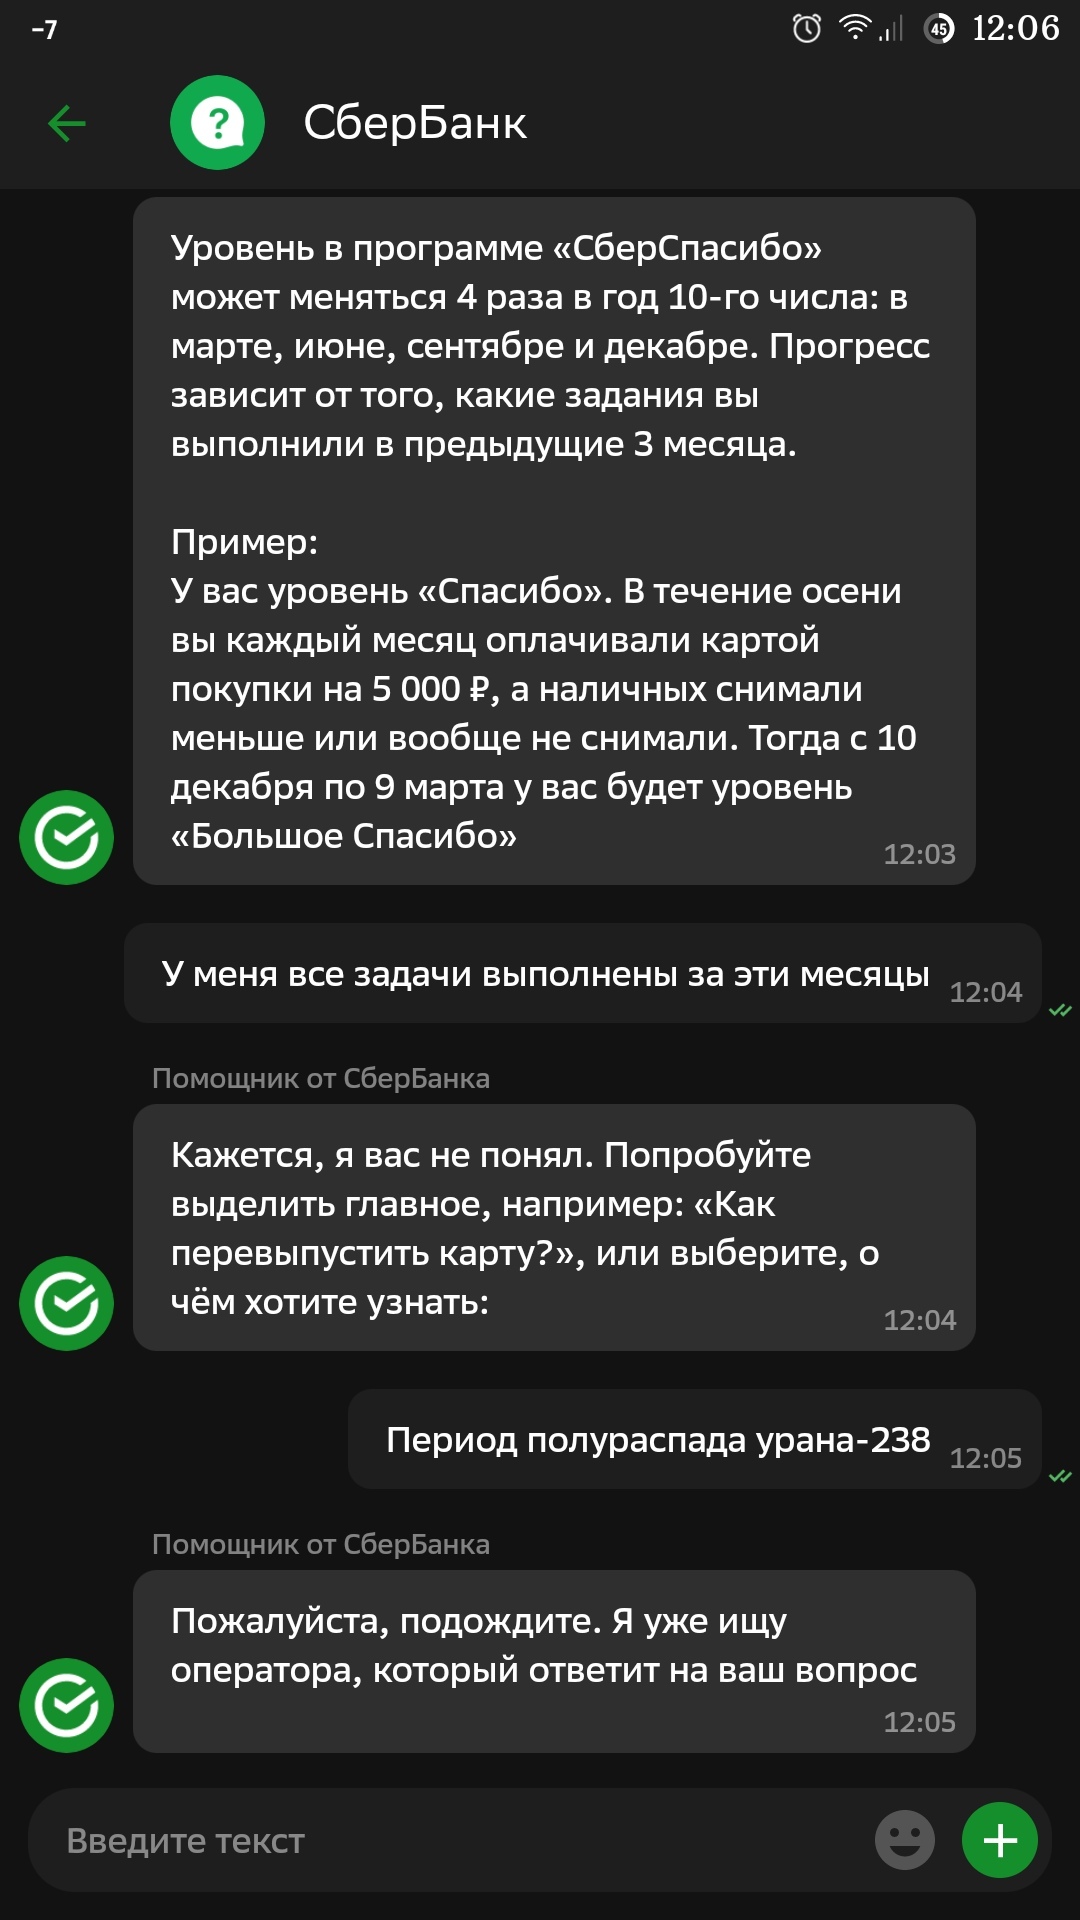 Sberbank removed the spasibs from instant cards - Sberbank, Support service, Longpost